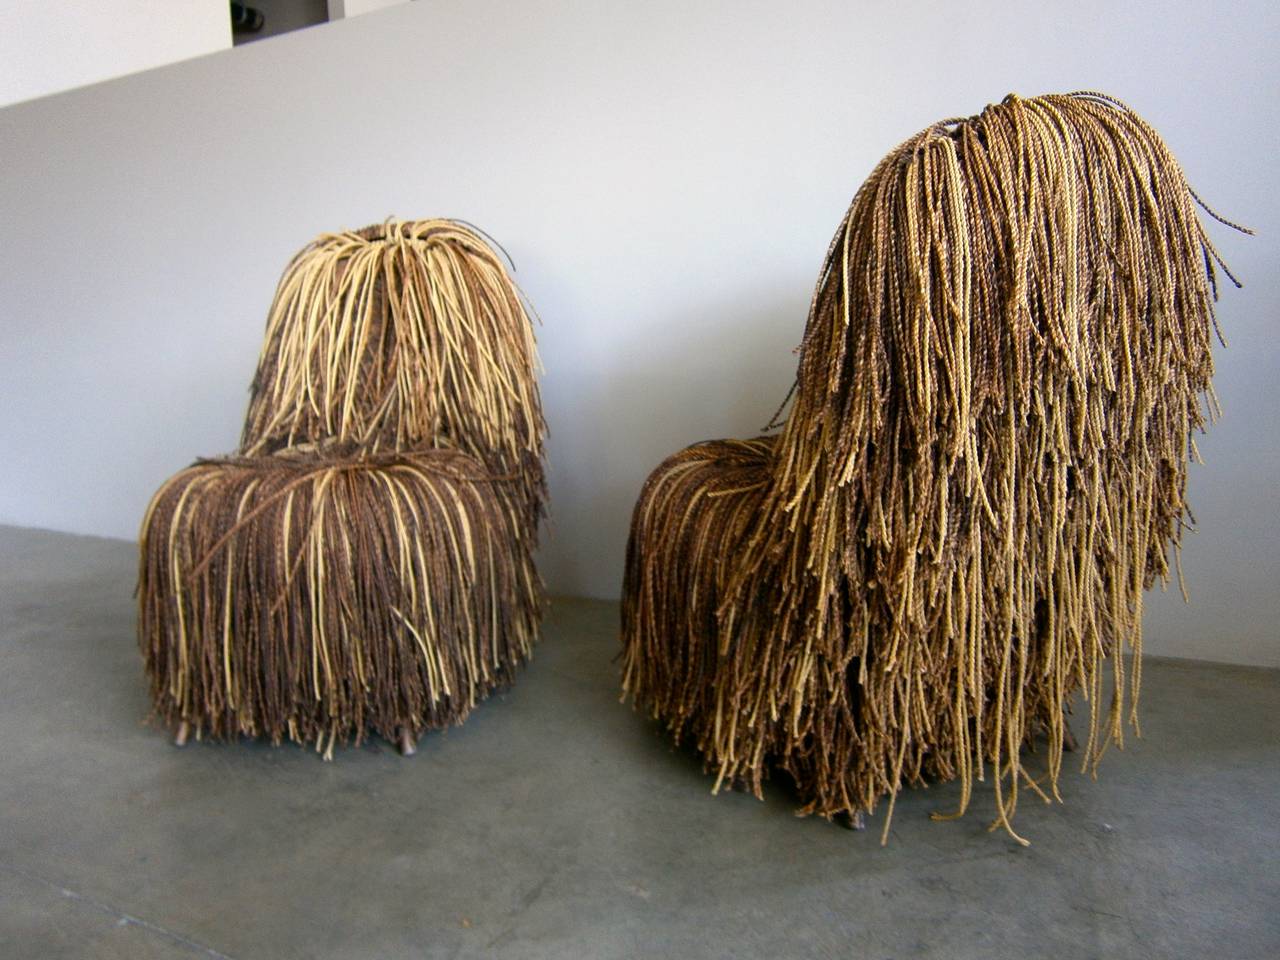 American Jocular Pair of Shaggy Cord Chairs in the Style of the Campana Brothers.